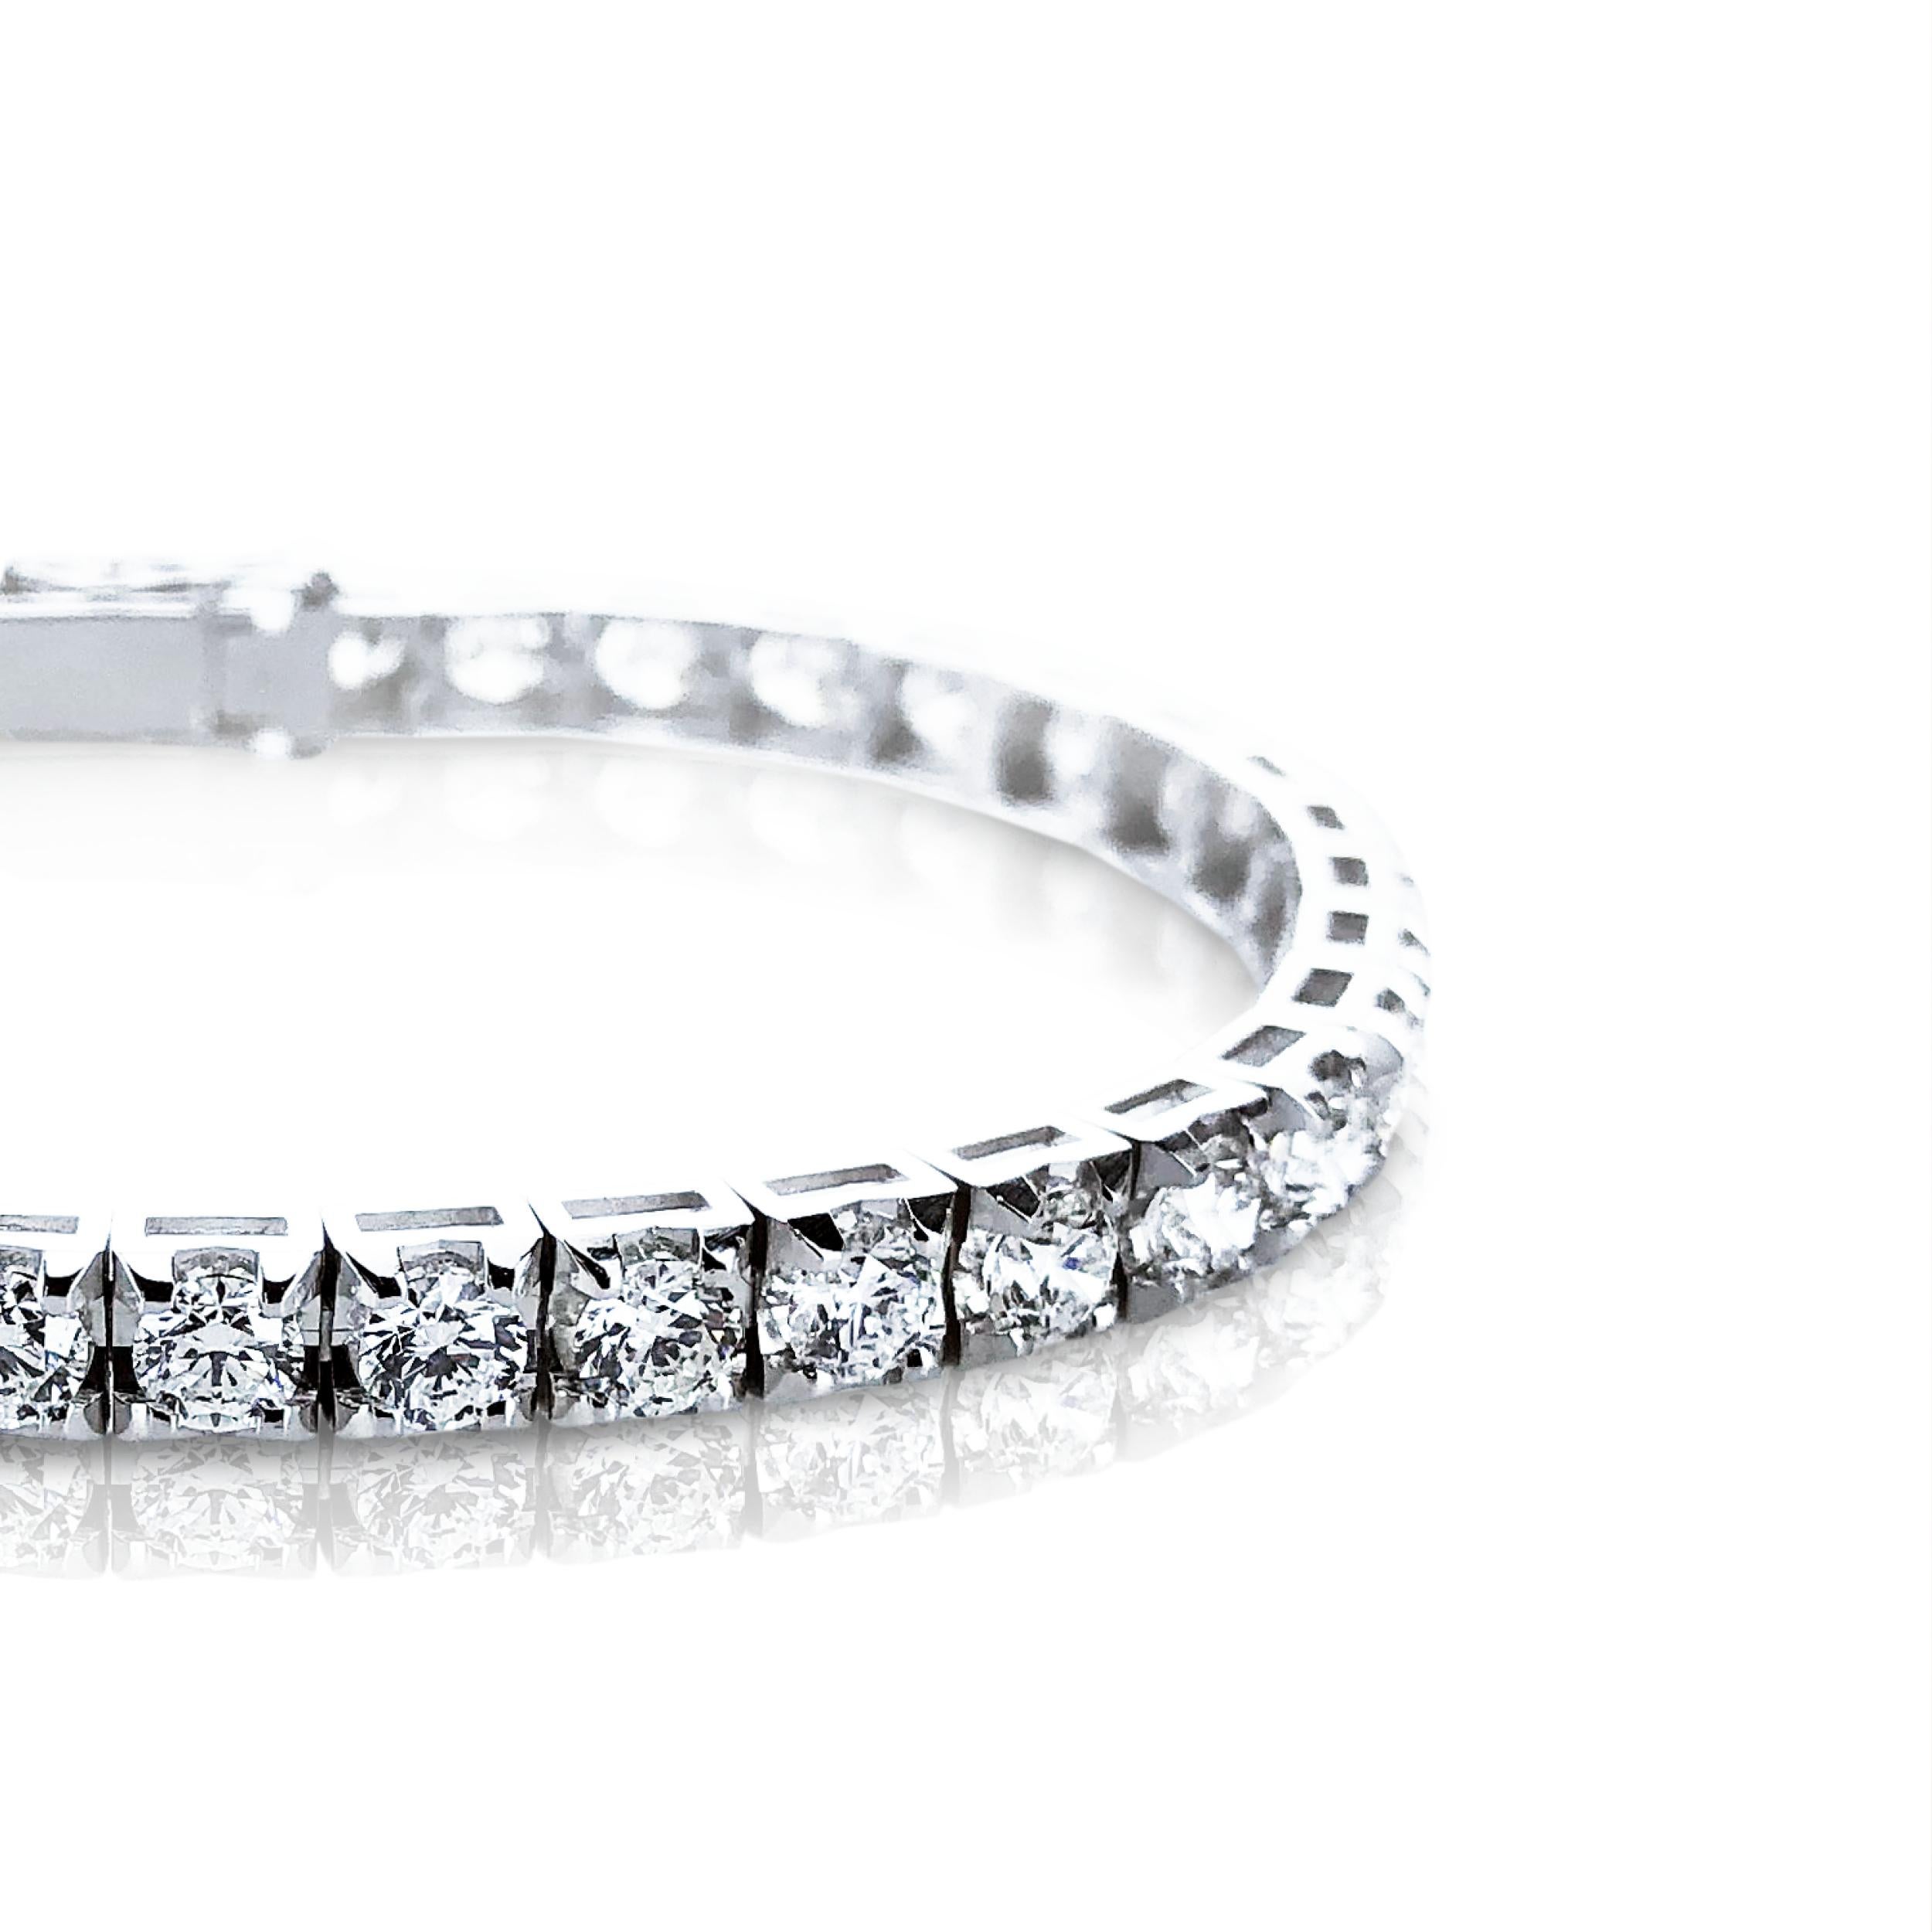 This 2.38 Carat HRD Certified Diamond Unisex Tennis Bracelet is set in 18kt white Gold. 

Timelessly stylish and wearable it is designed with the pyramid setting making the diamond appear larger than normal and effortlessly adding style and elegance